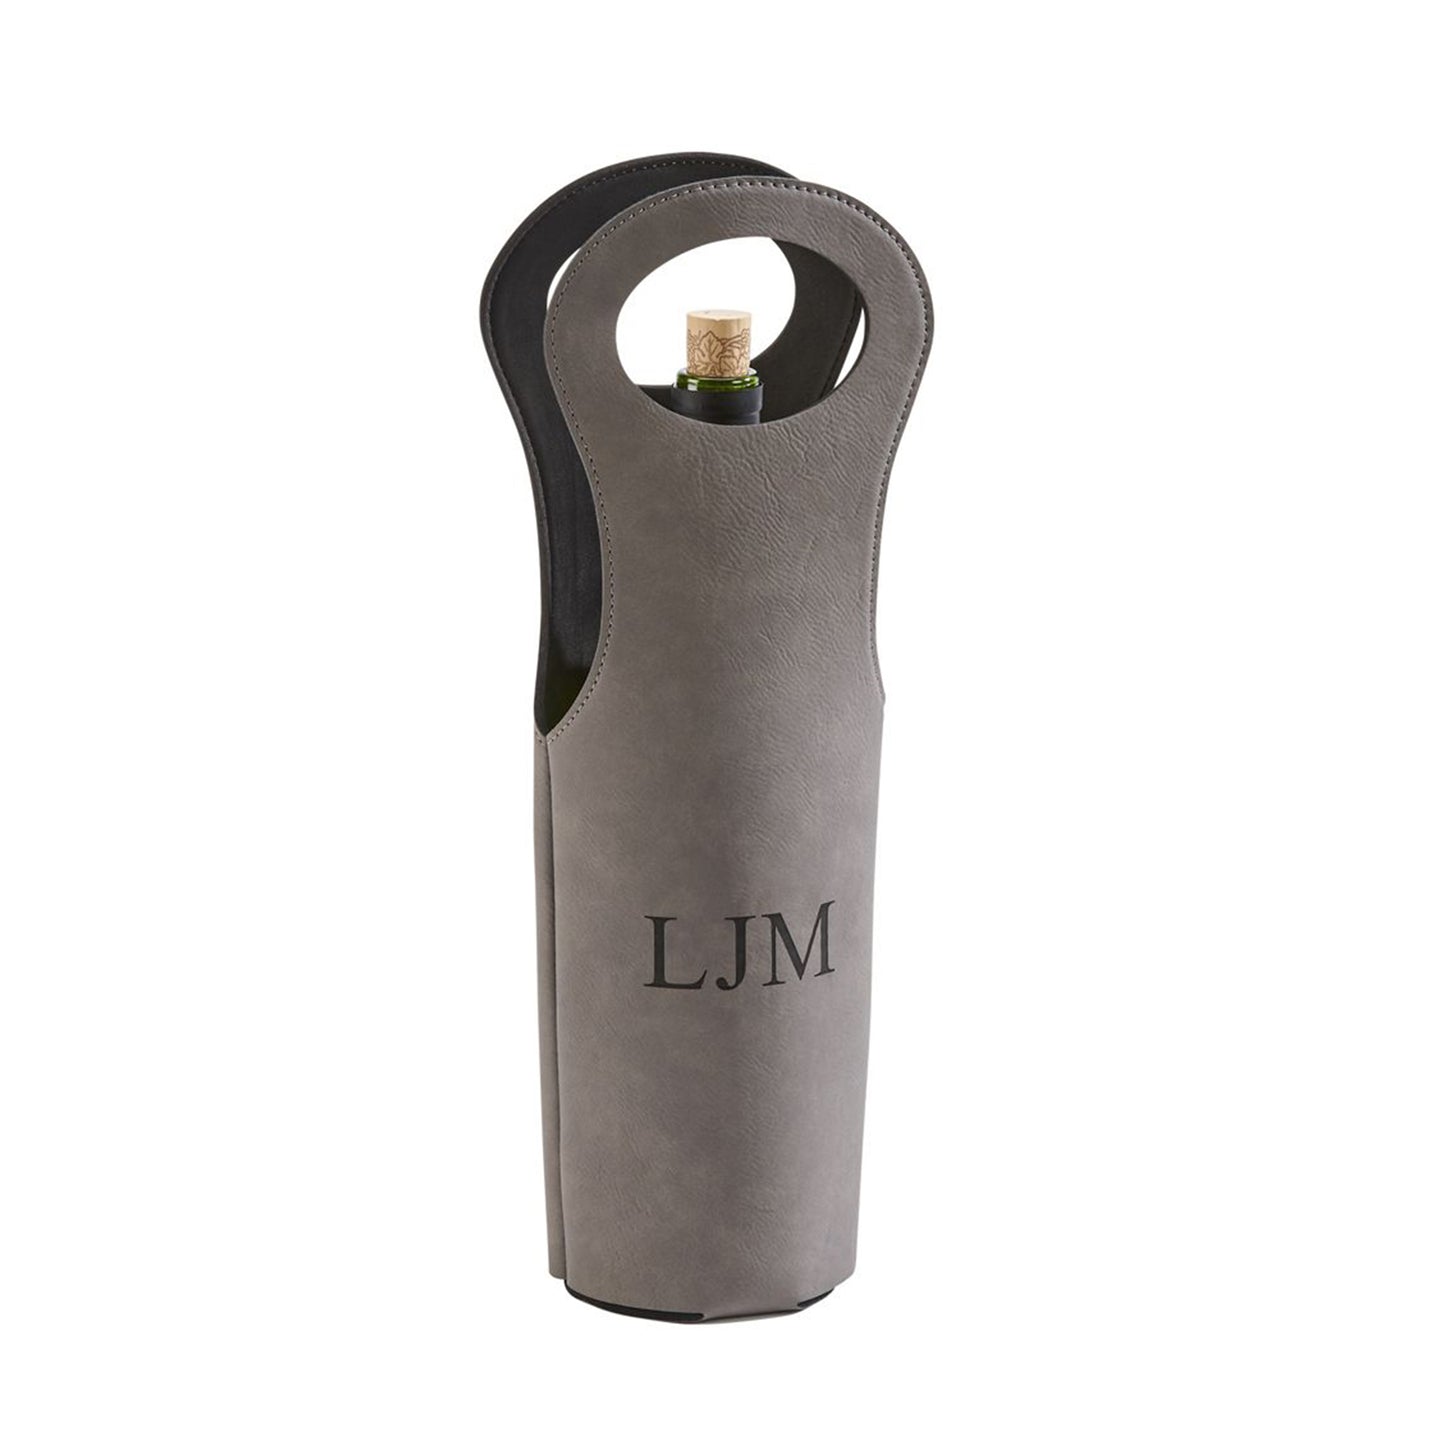 Leatherette Wine Holder in Grey - 14.5"